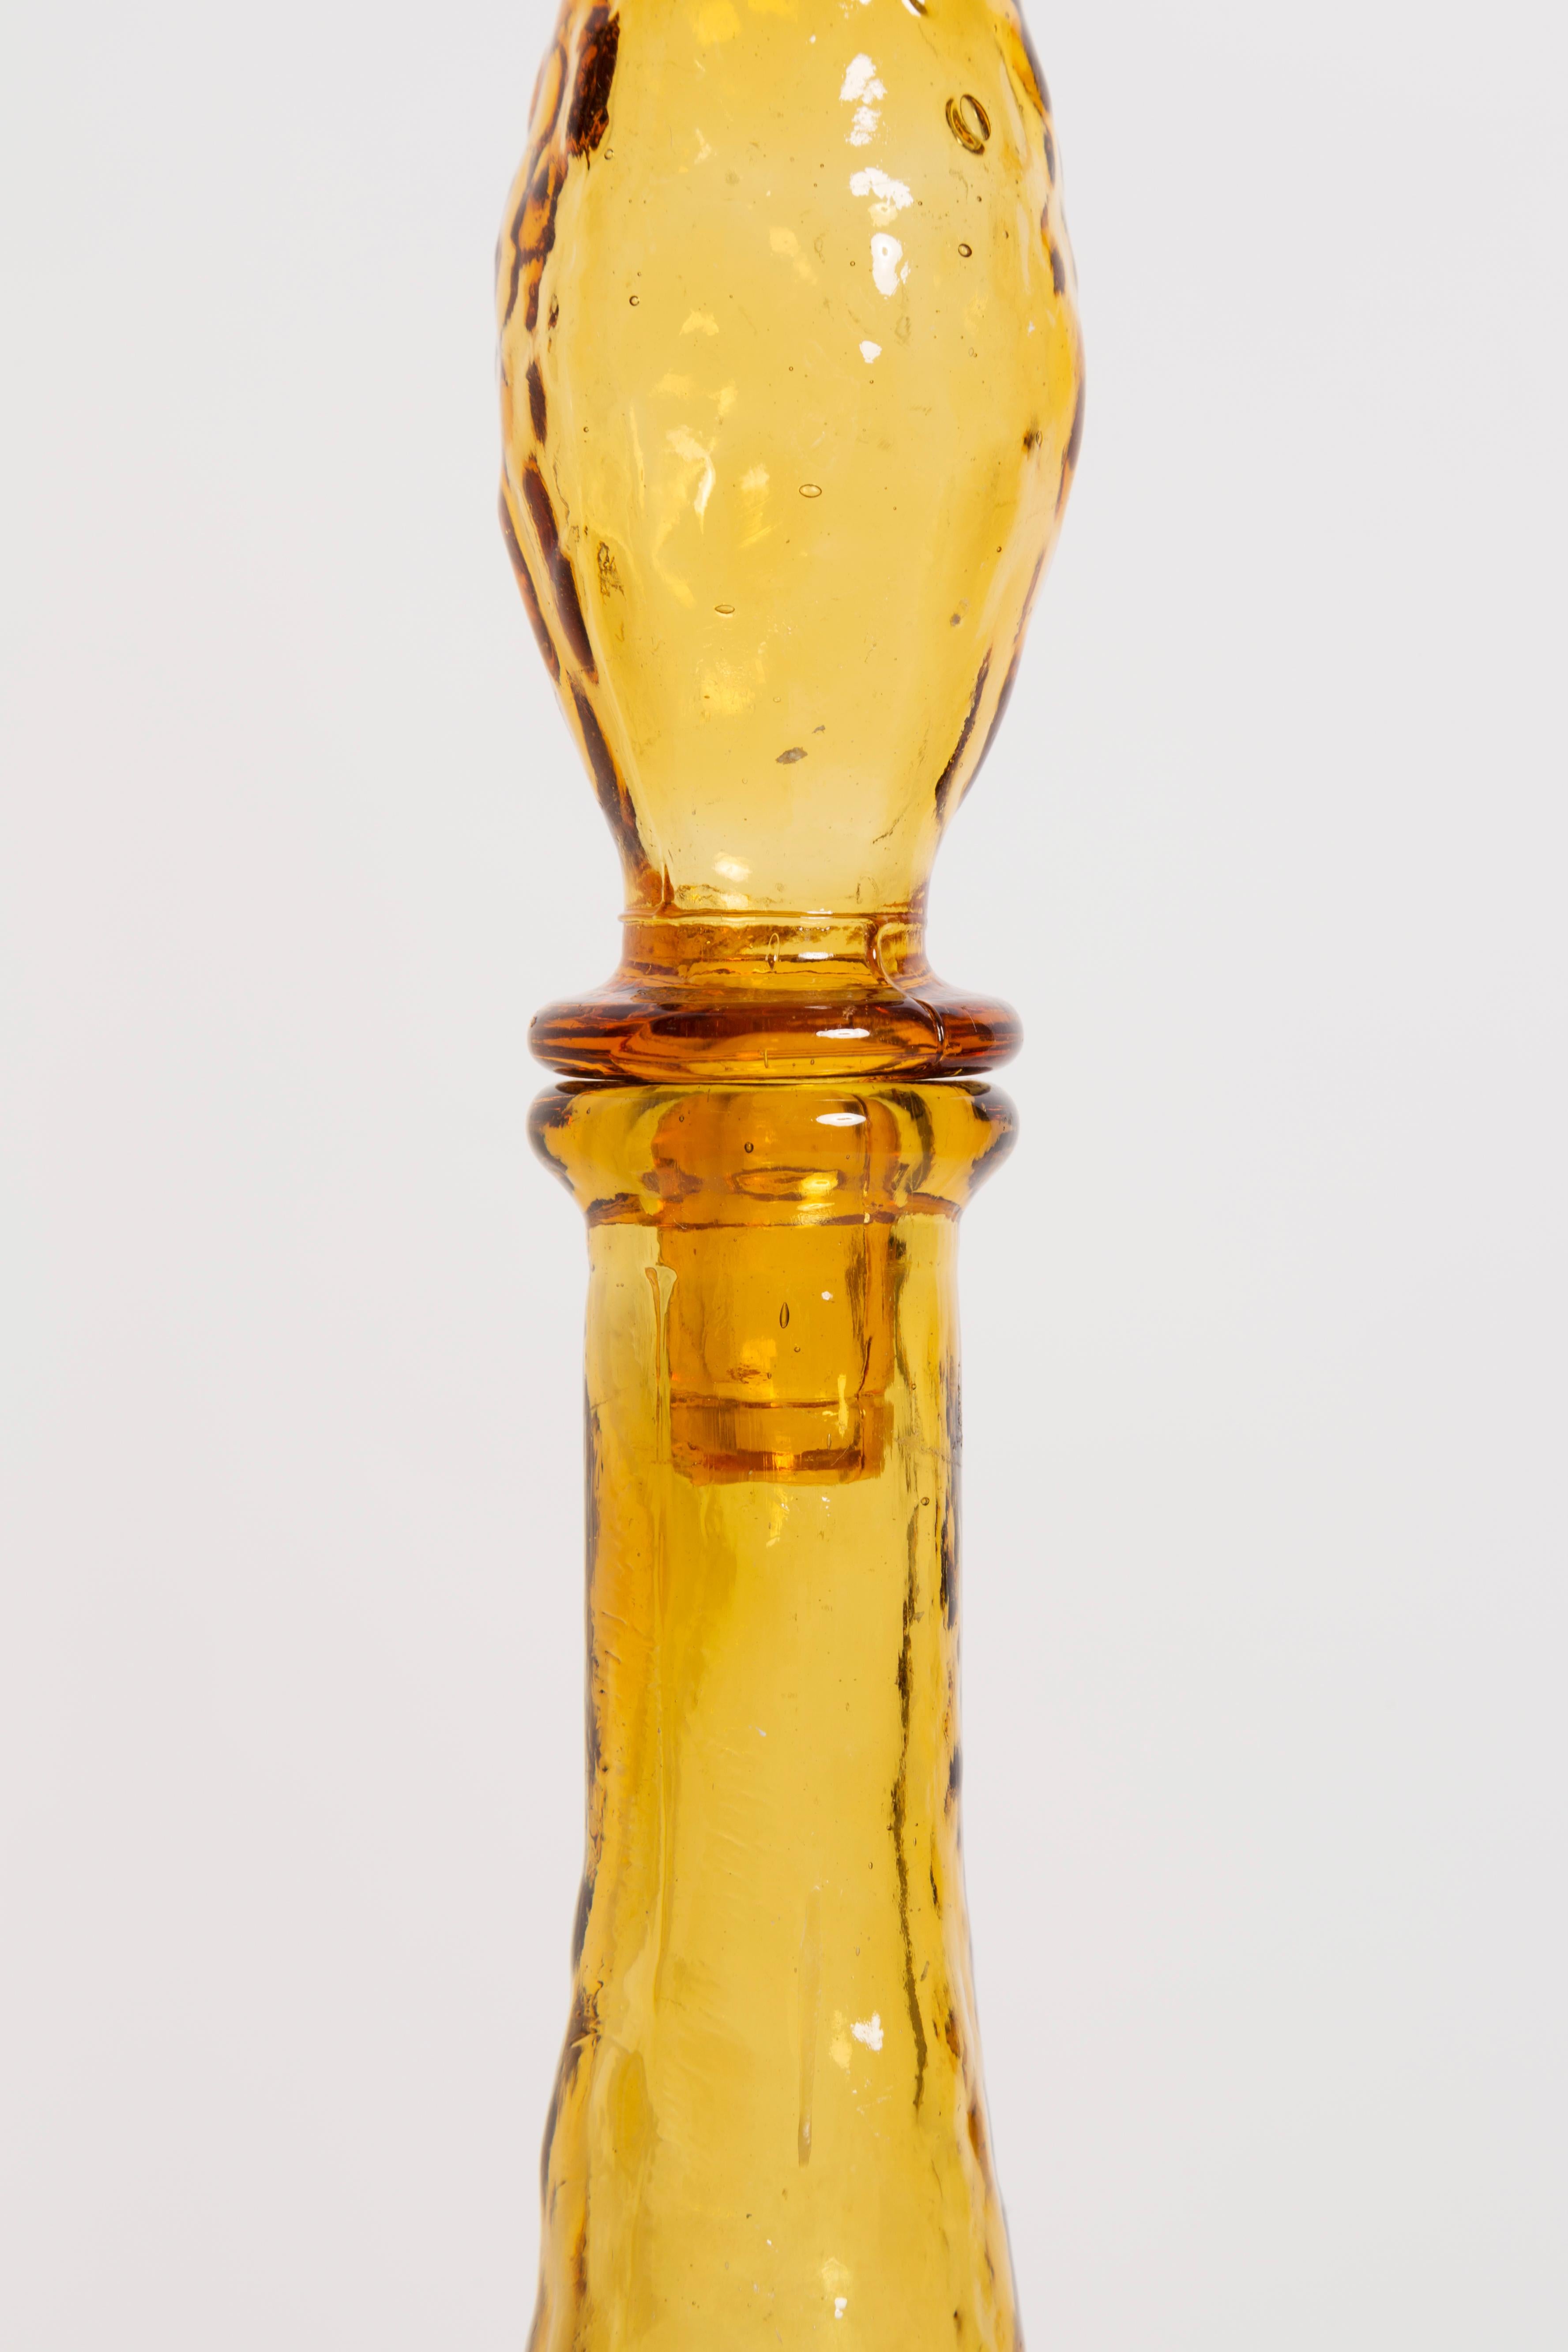 Mid-Century Modern Mid-Century Honey Yellow Empoli Glass Decanter with Stopper, Italy, 1960s For Sale